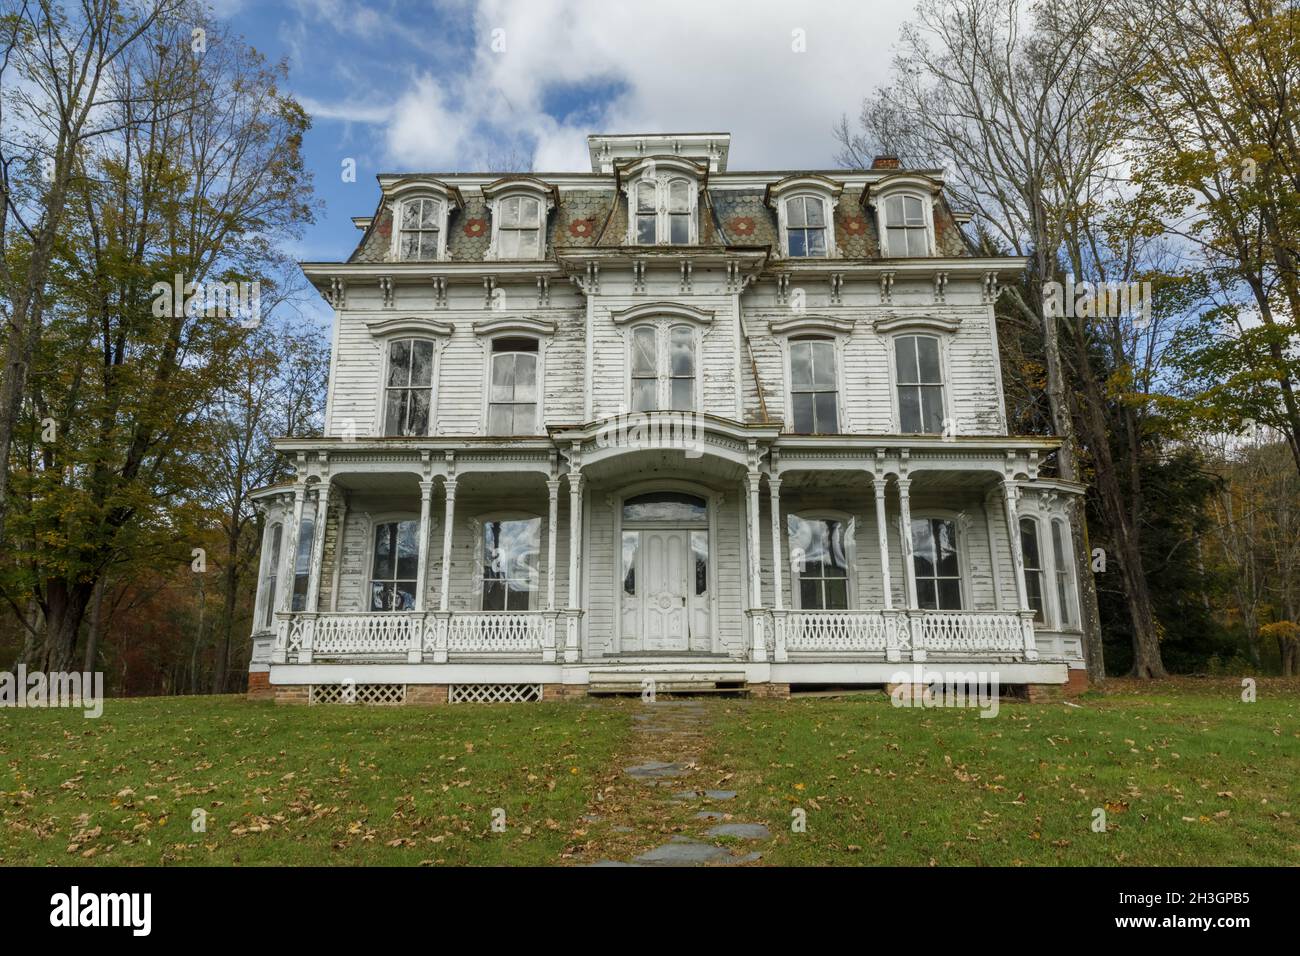 Peter D. Smith House, Waterloo Village, Stanhope, New Jersey, USA Stockfoto